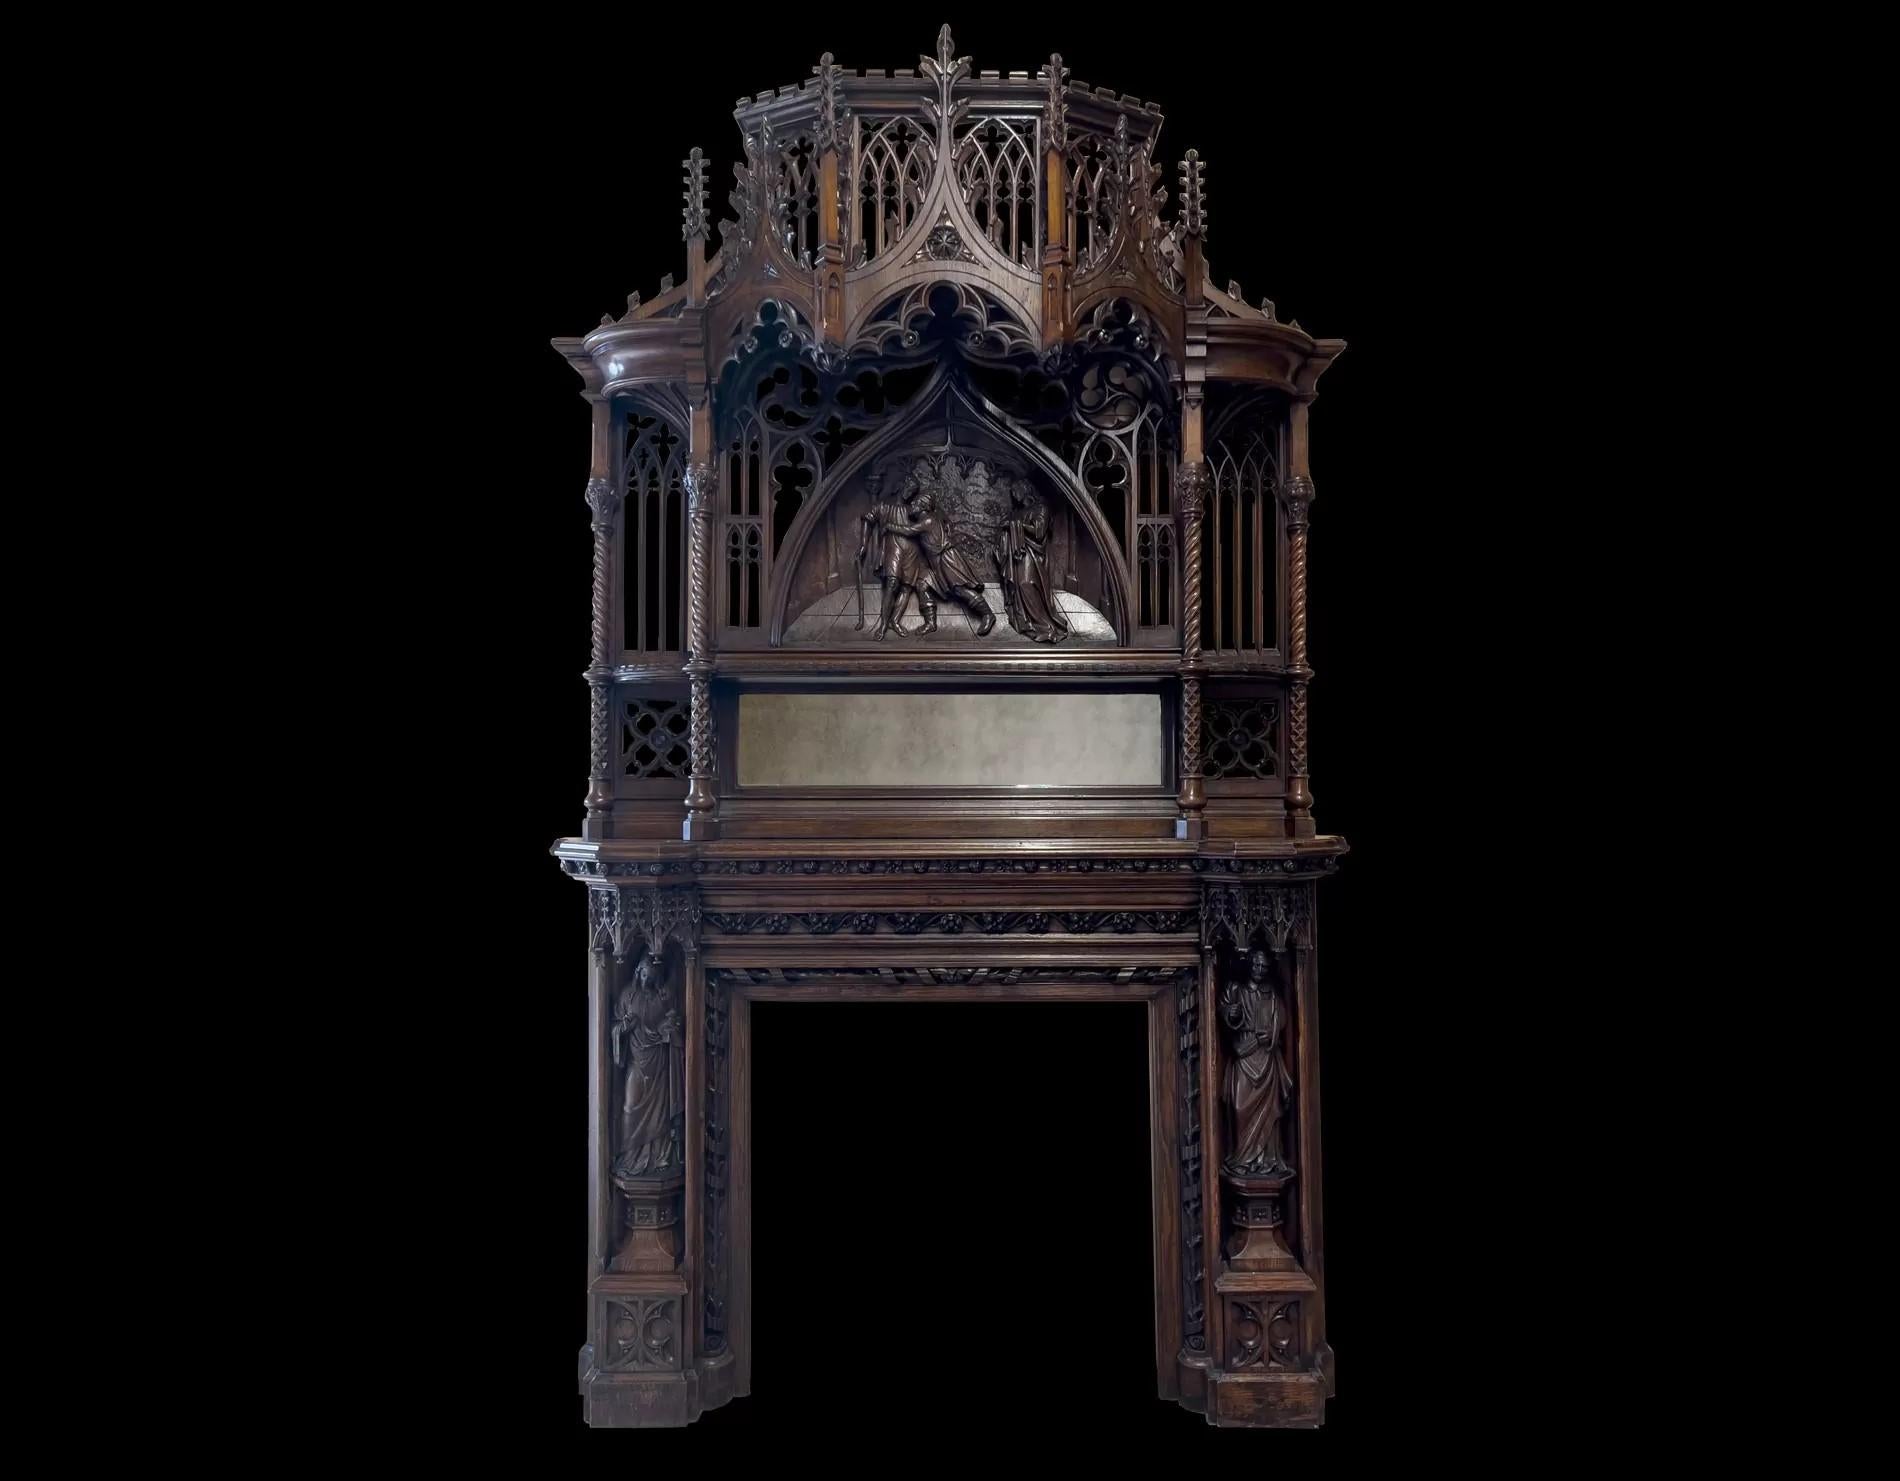 A magnificent antique English 19th century Gothic Revival carved oak fire surround
This beautifully designed fireplace is both grand and stunning, it features outstanding quality of carvings, with figures in full relief, gothic tracery, open